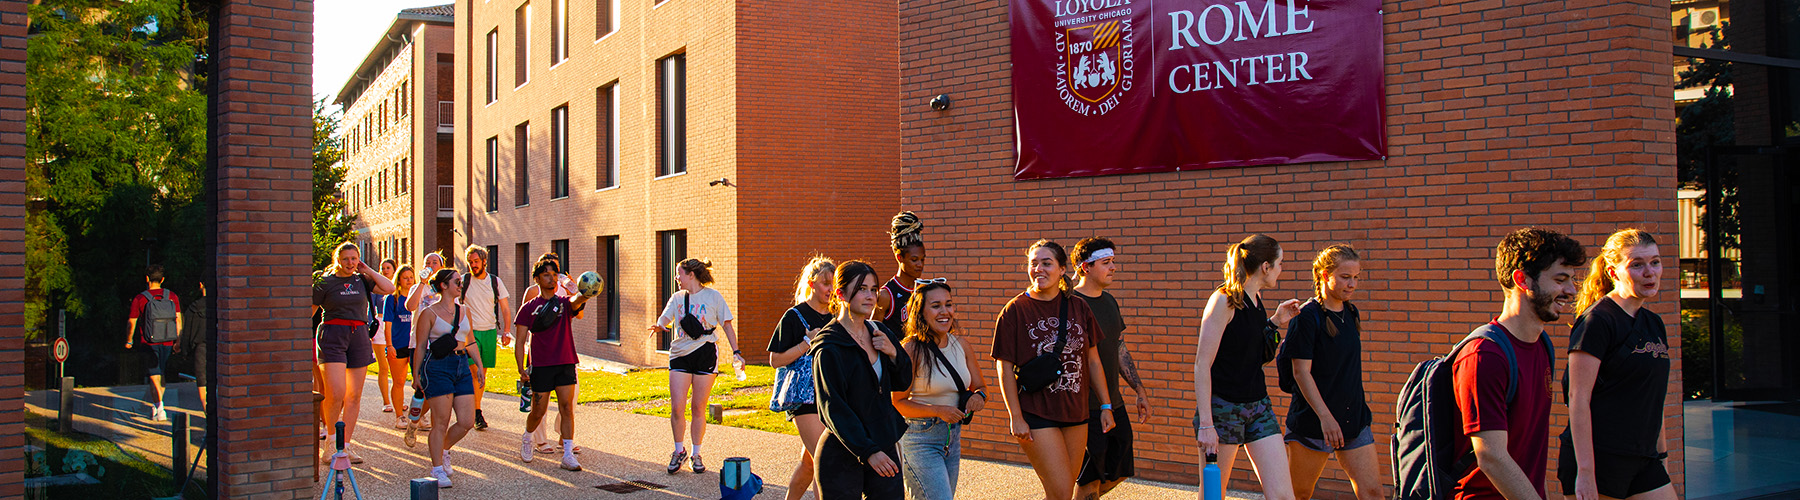 A large group of students walk along the outside of the Rome Center